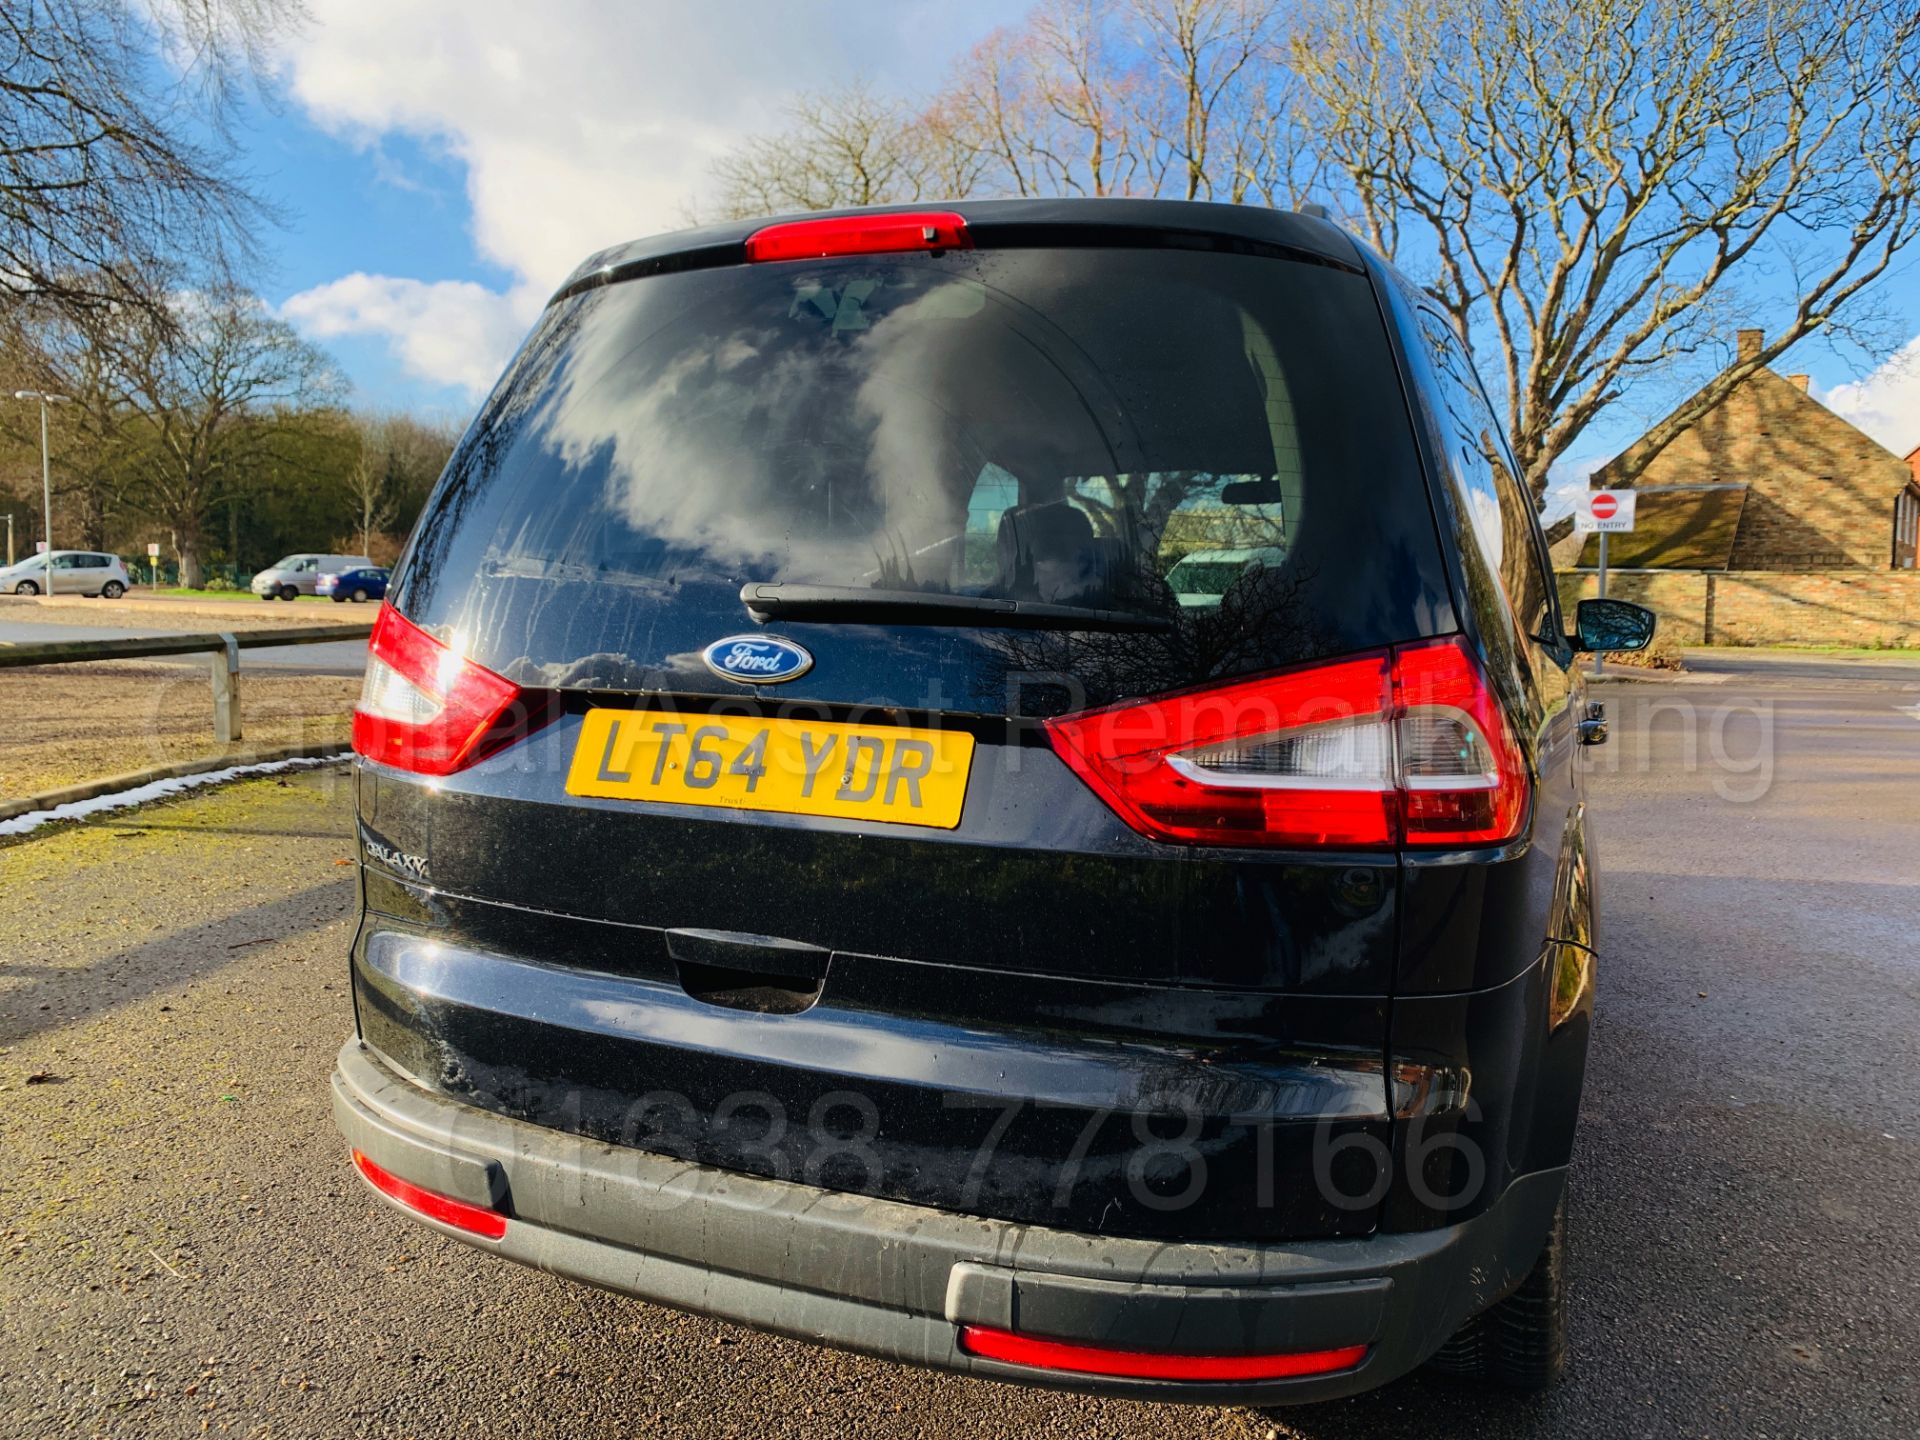 FORD GALAXY **ZETEC** 7 SEATER MPV (2015 MODEL) 2.0 TDCI - 140 BHP - AUTO POWER SHIFT (1 OWNER) - Image 10 of 40